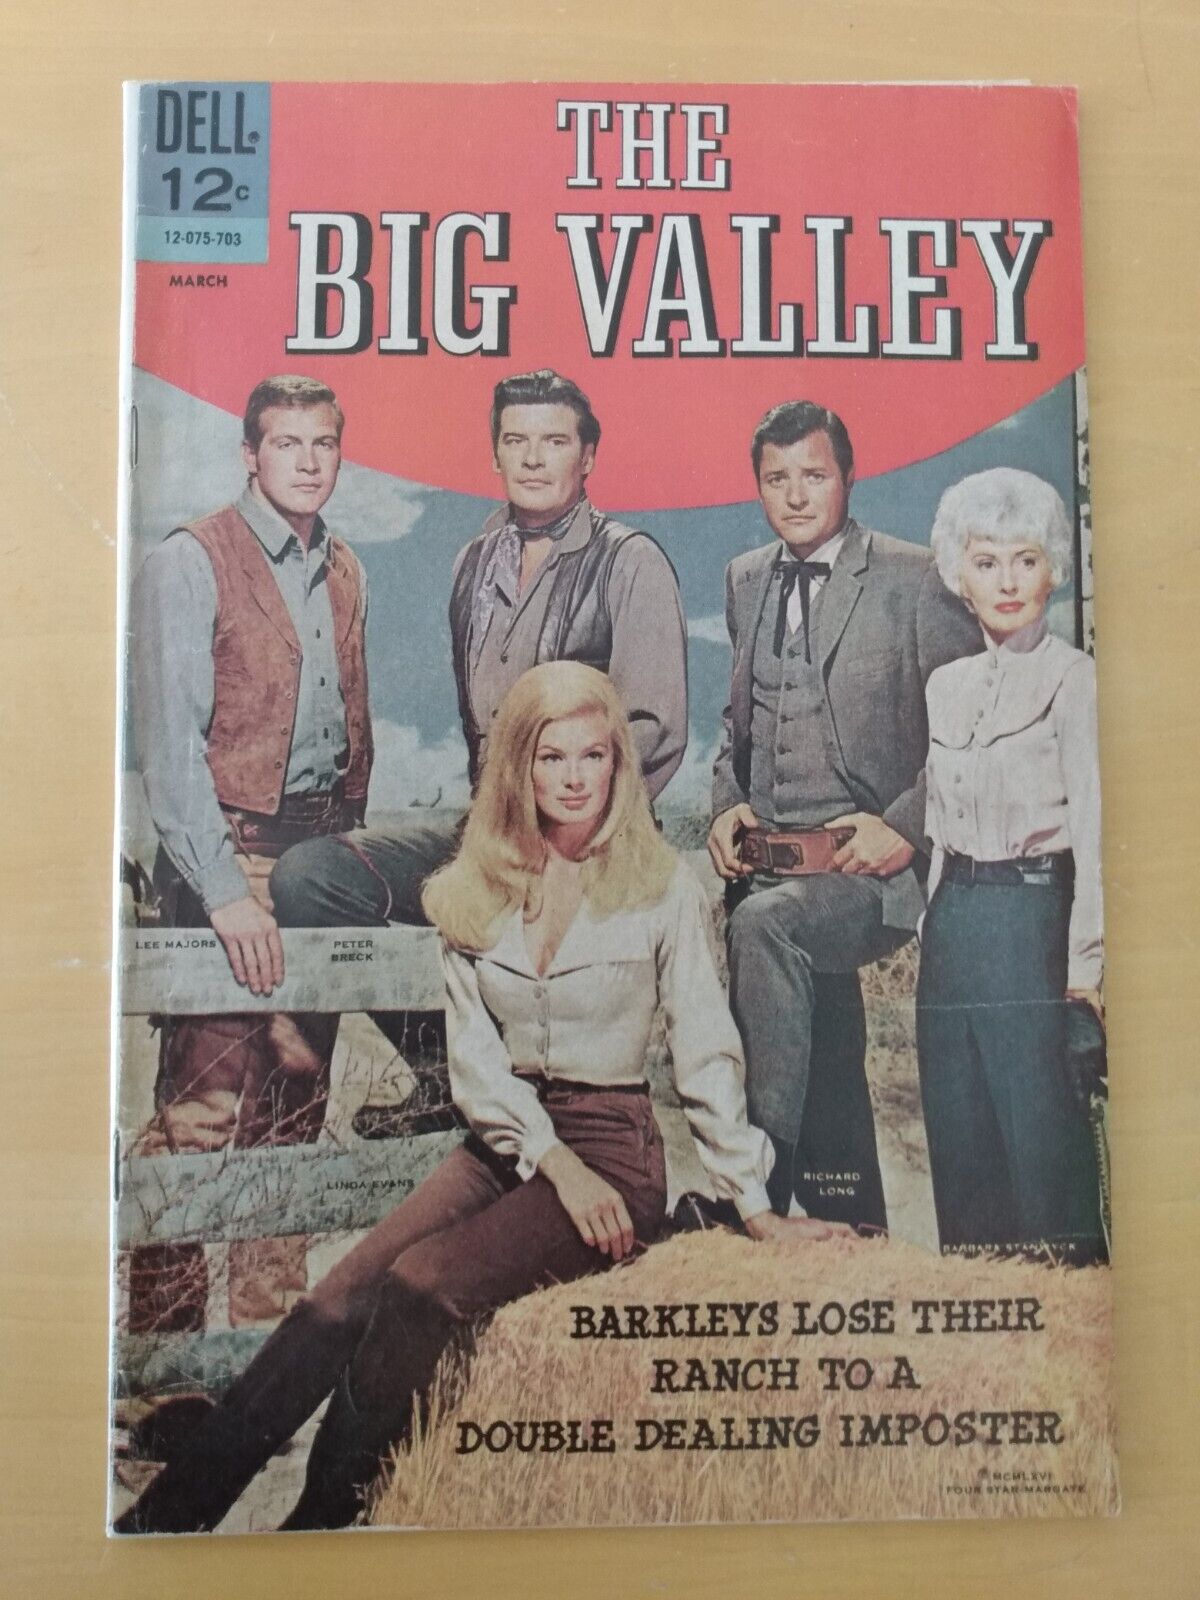 BIG VALLEY #3...DELL PUBLISHING COMIC...1967...FULL CAST PHOTO COVER..6.5.